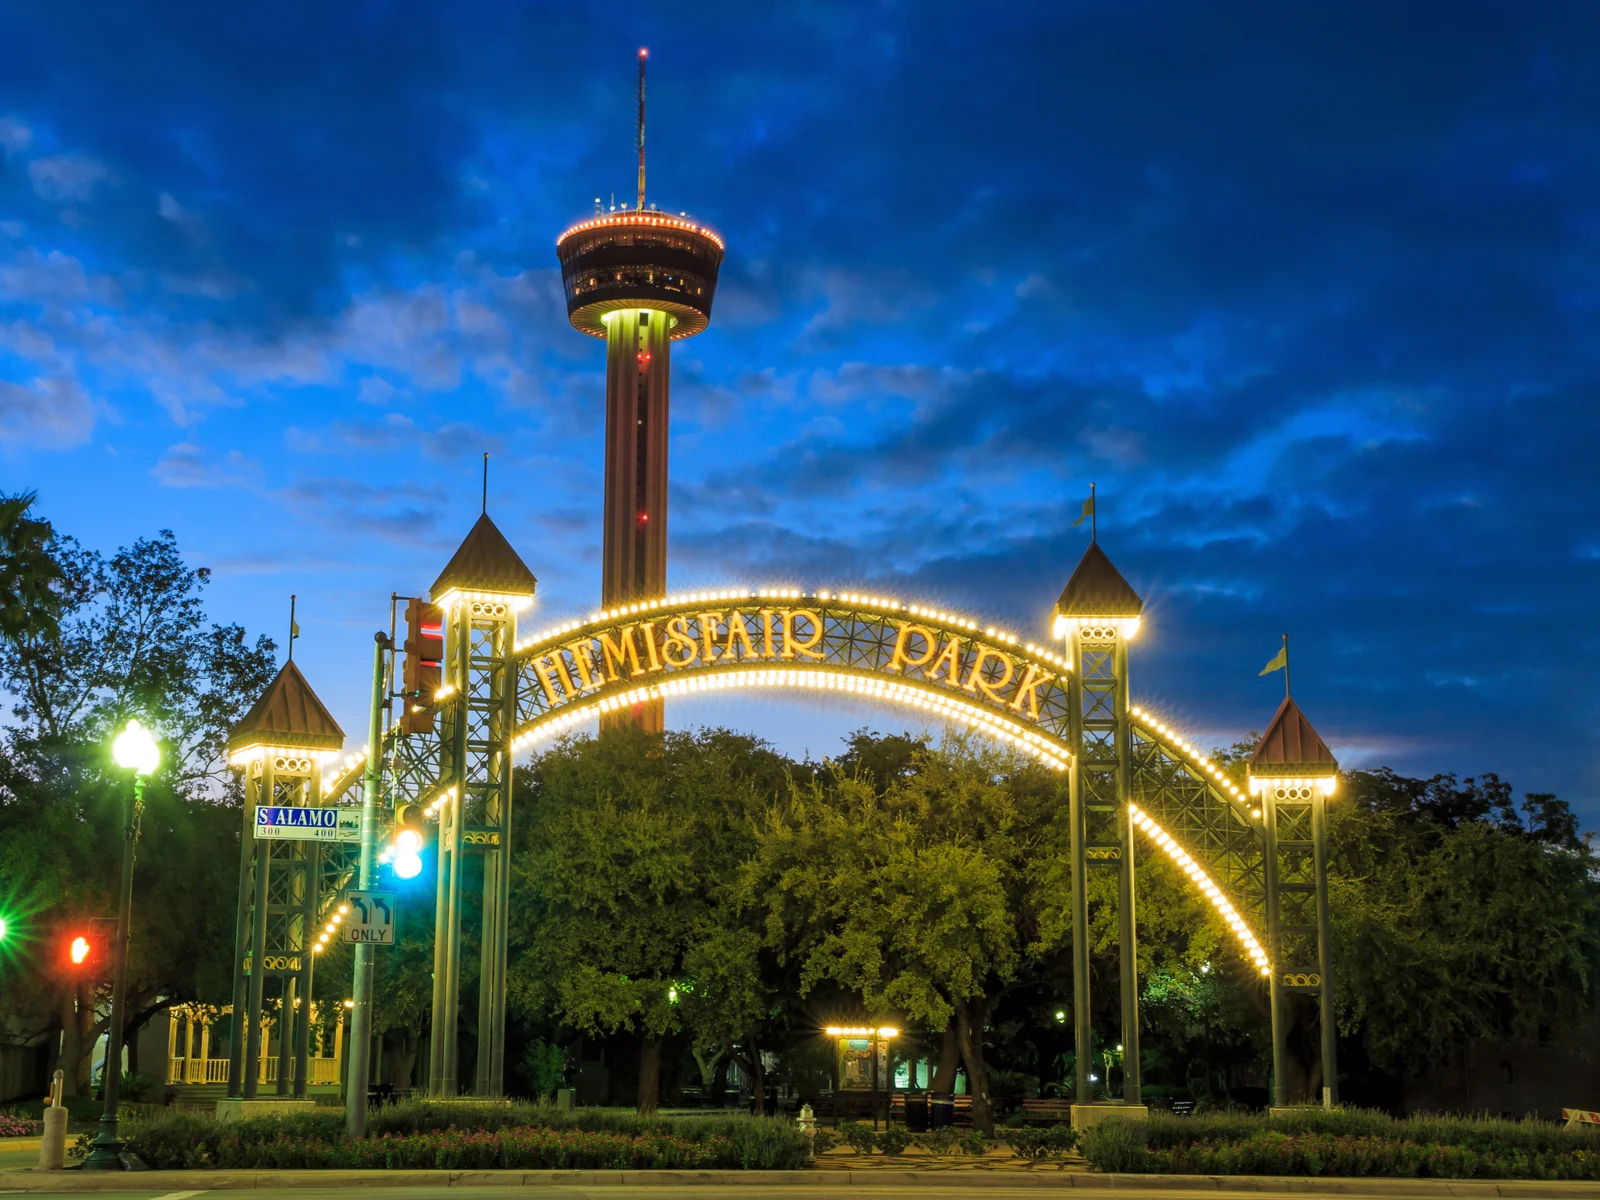 One of the best things to do in San Antonio, Hemisfair Park, pictured at dusk